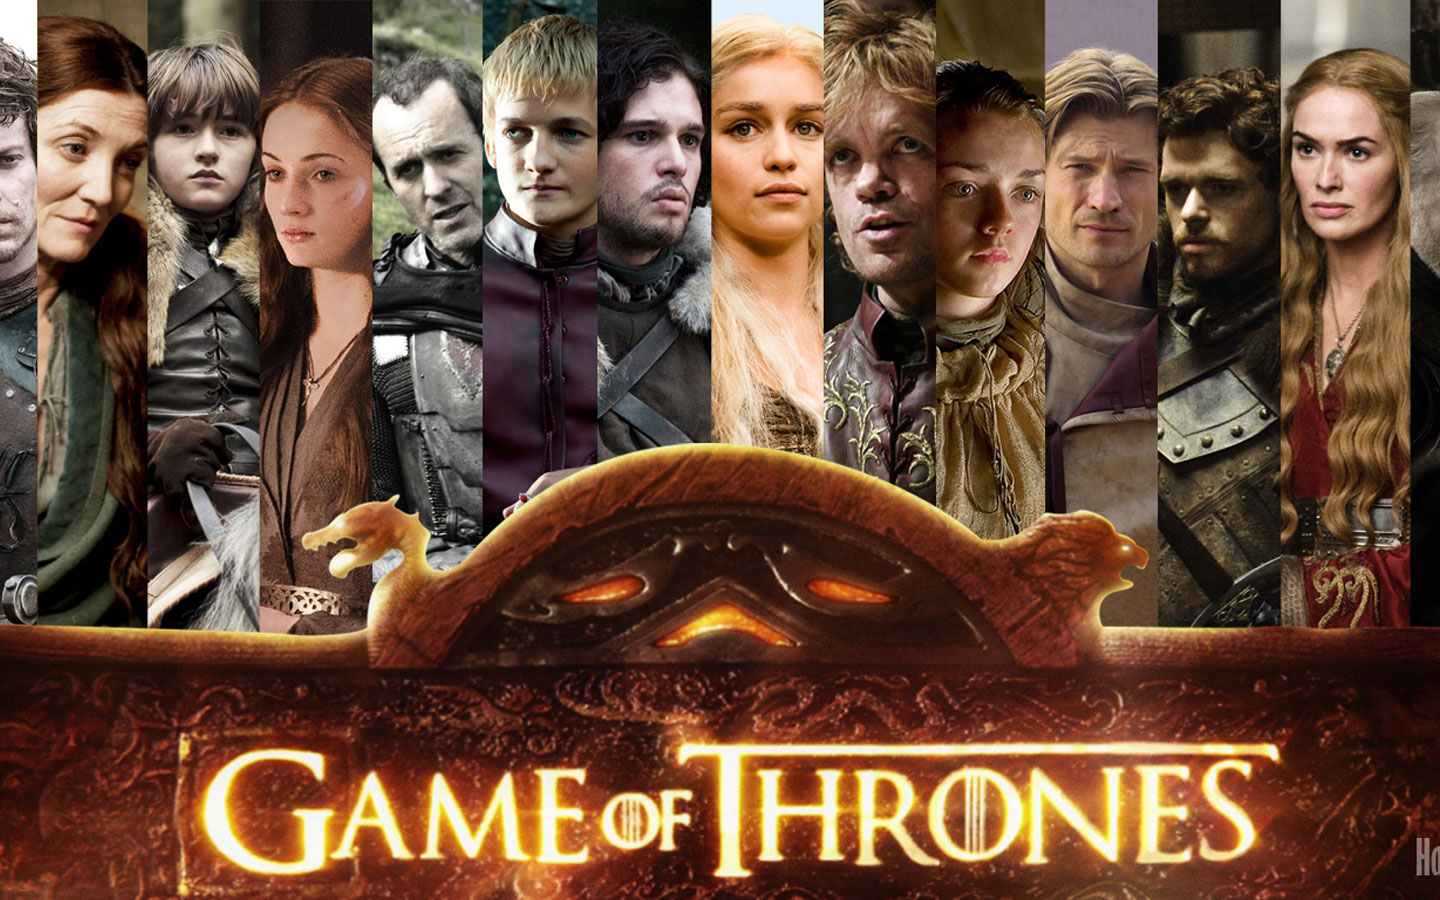 4. The original pilot for GoT has never aired and the show was almost stopped